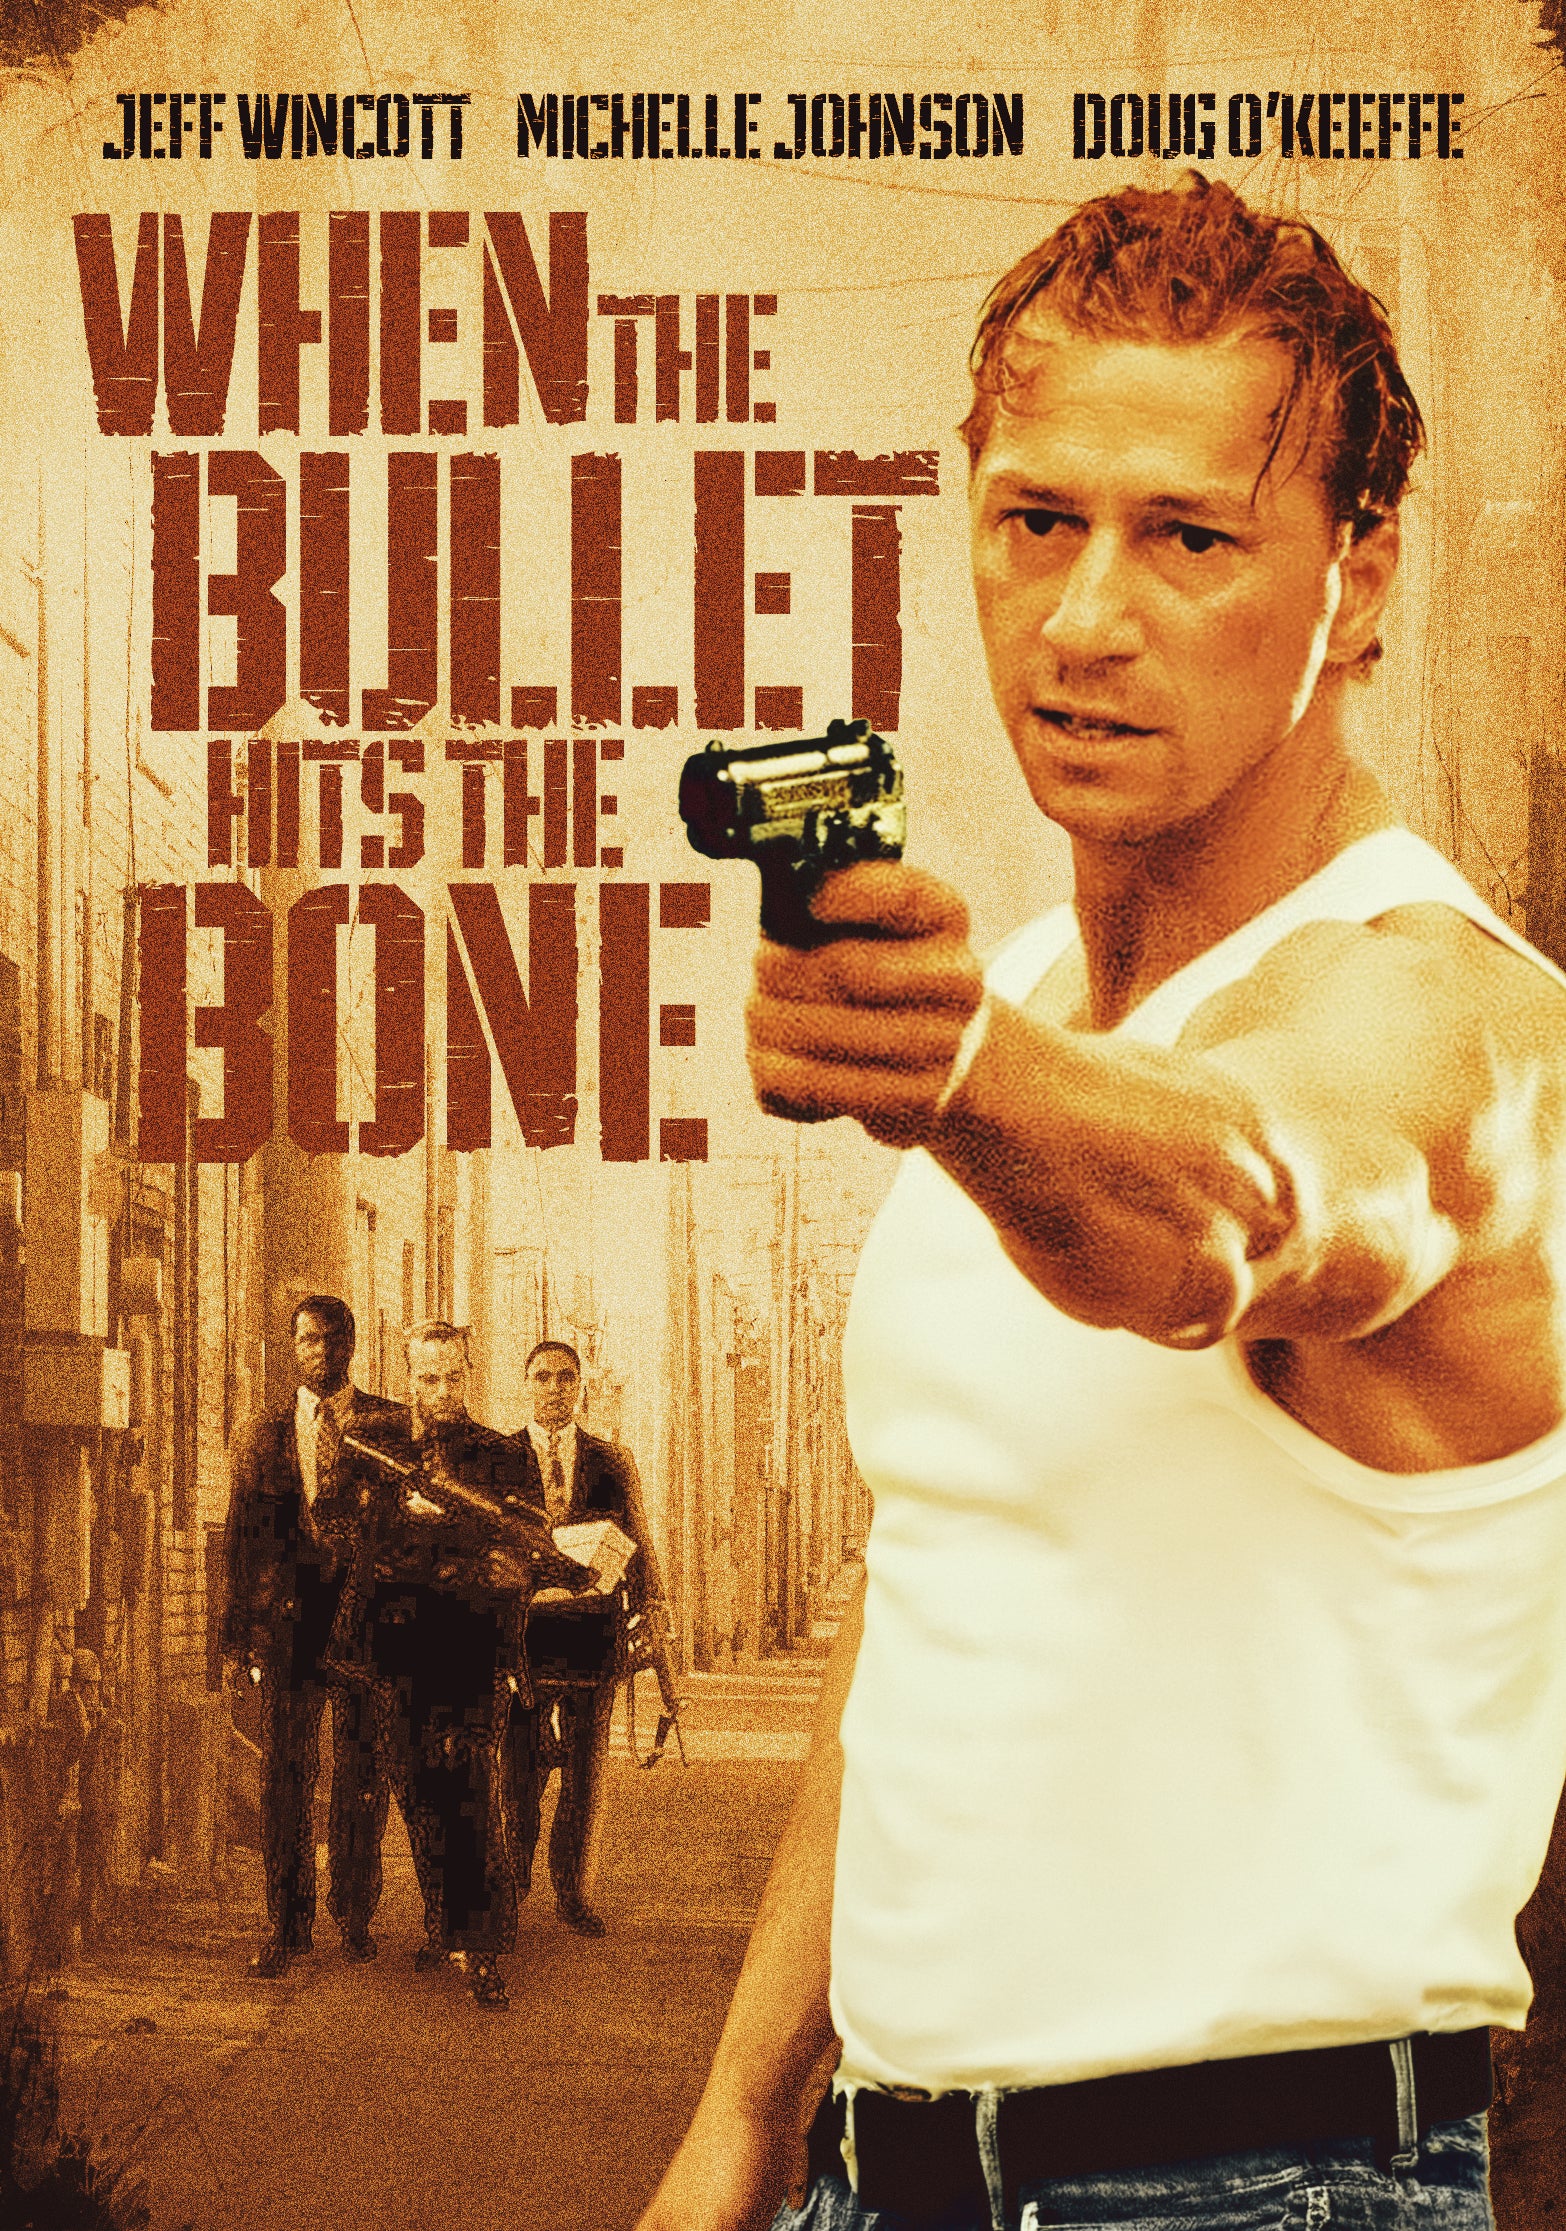 WHEN THE BULLET HITS THE BONE DVD [PRE-ORDER]